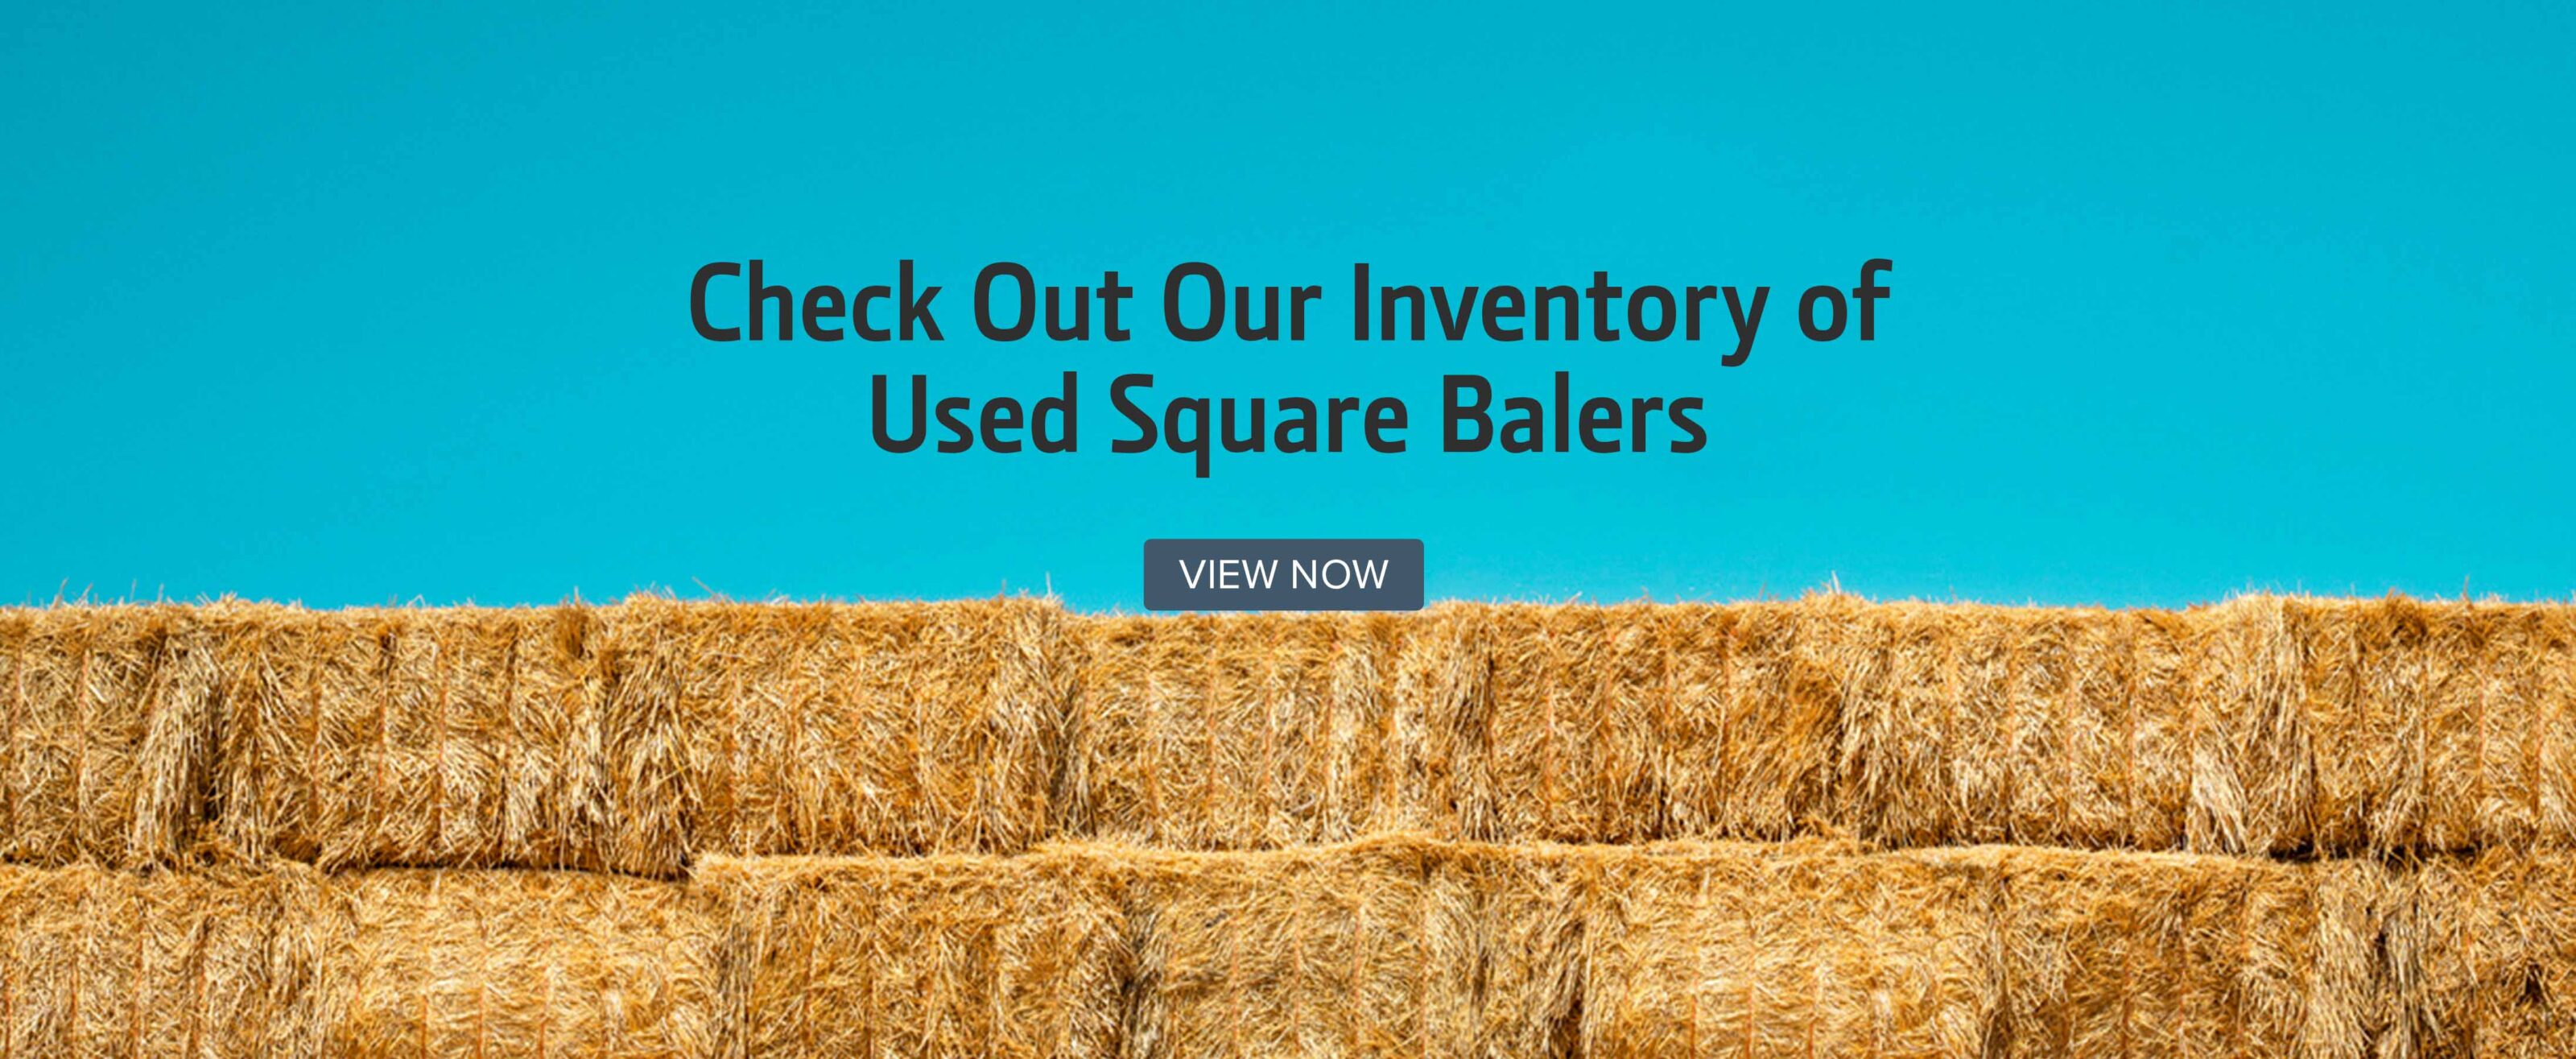 Check Out Our Inventory of Used Square Balers